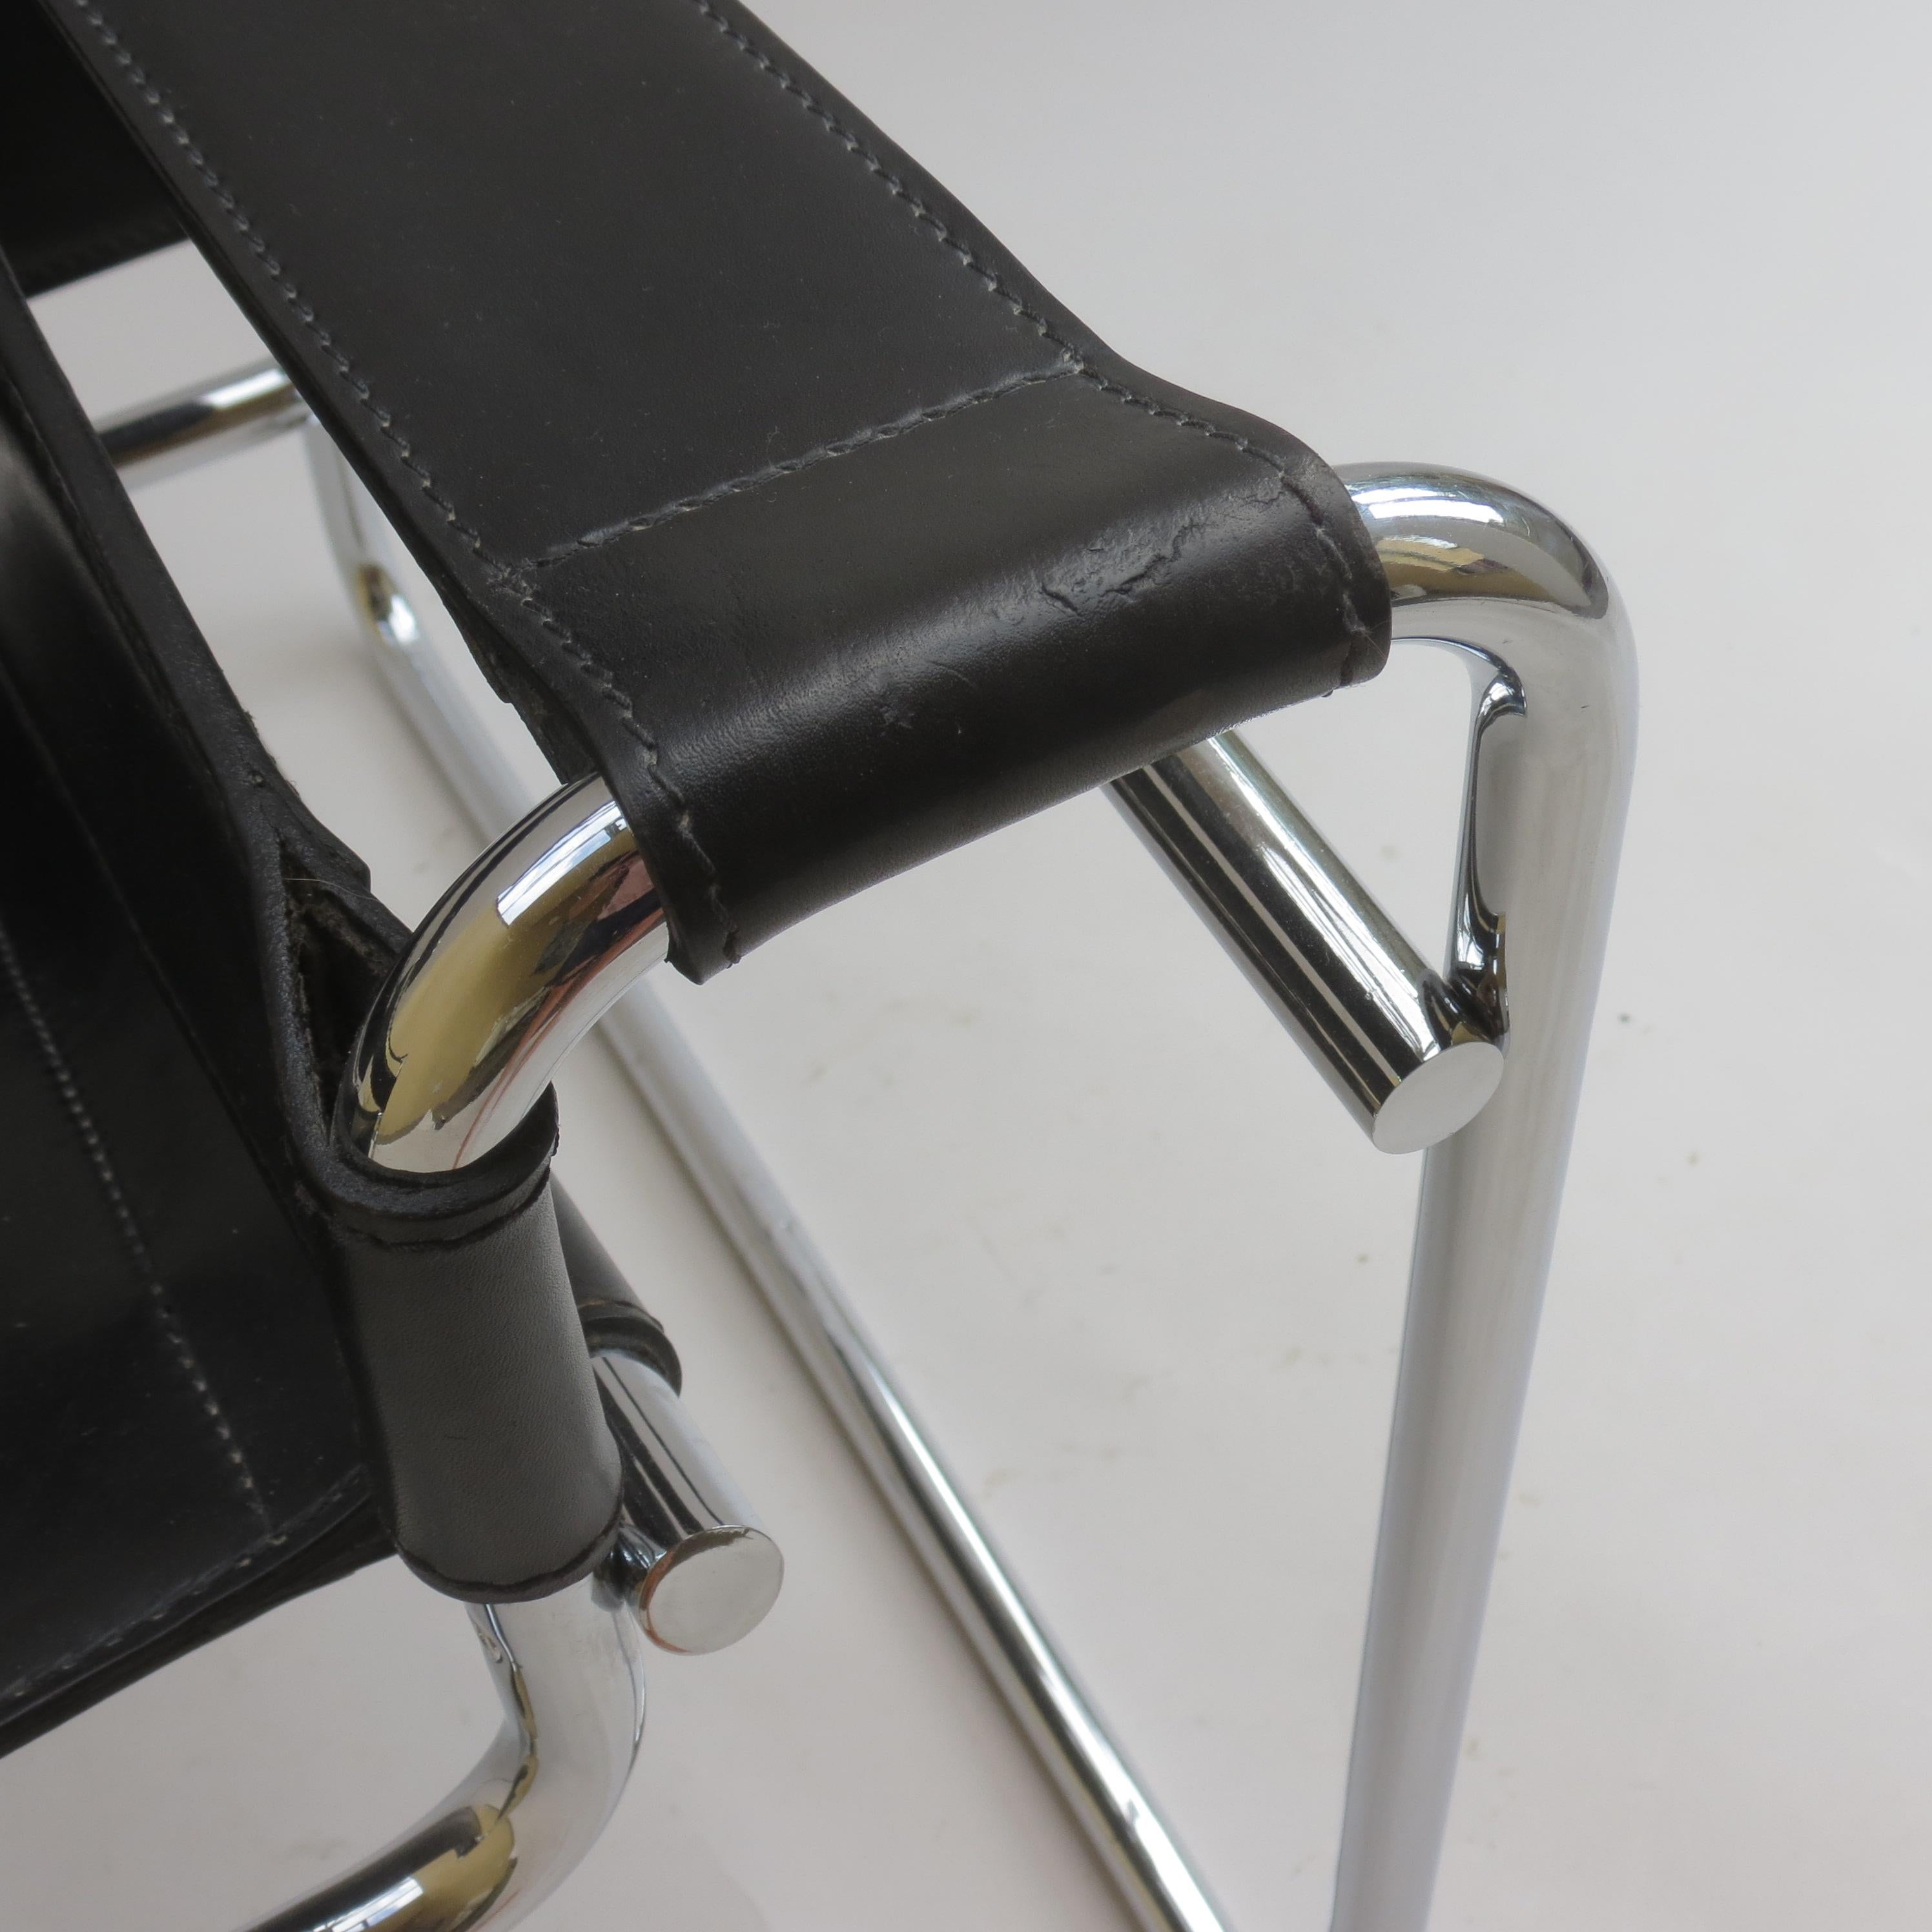 American 1980s Wassily B3 Leather and Chrome Chair Marcel Breuer for Knoll